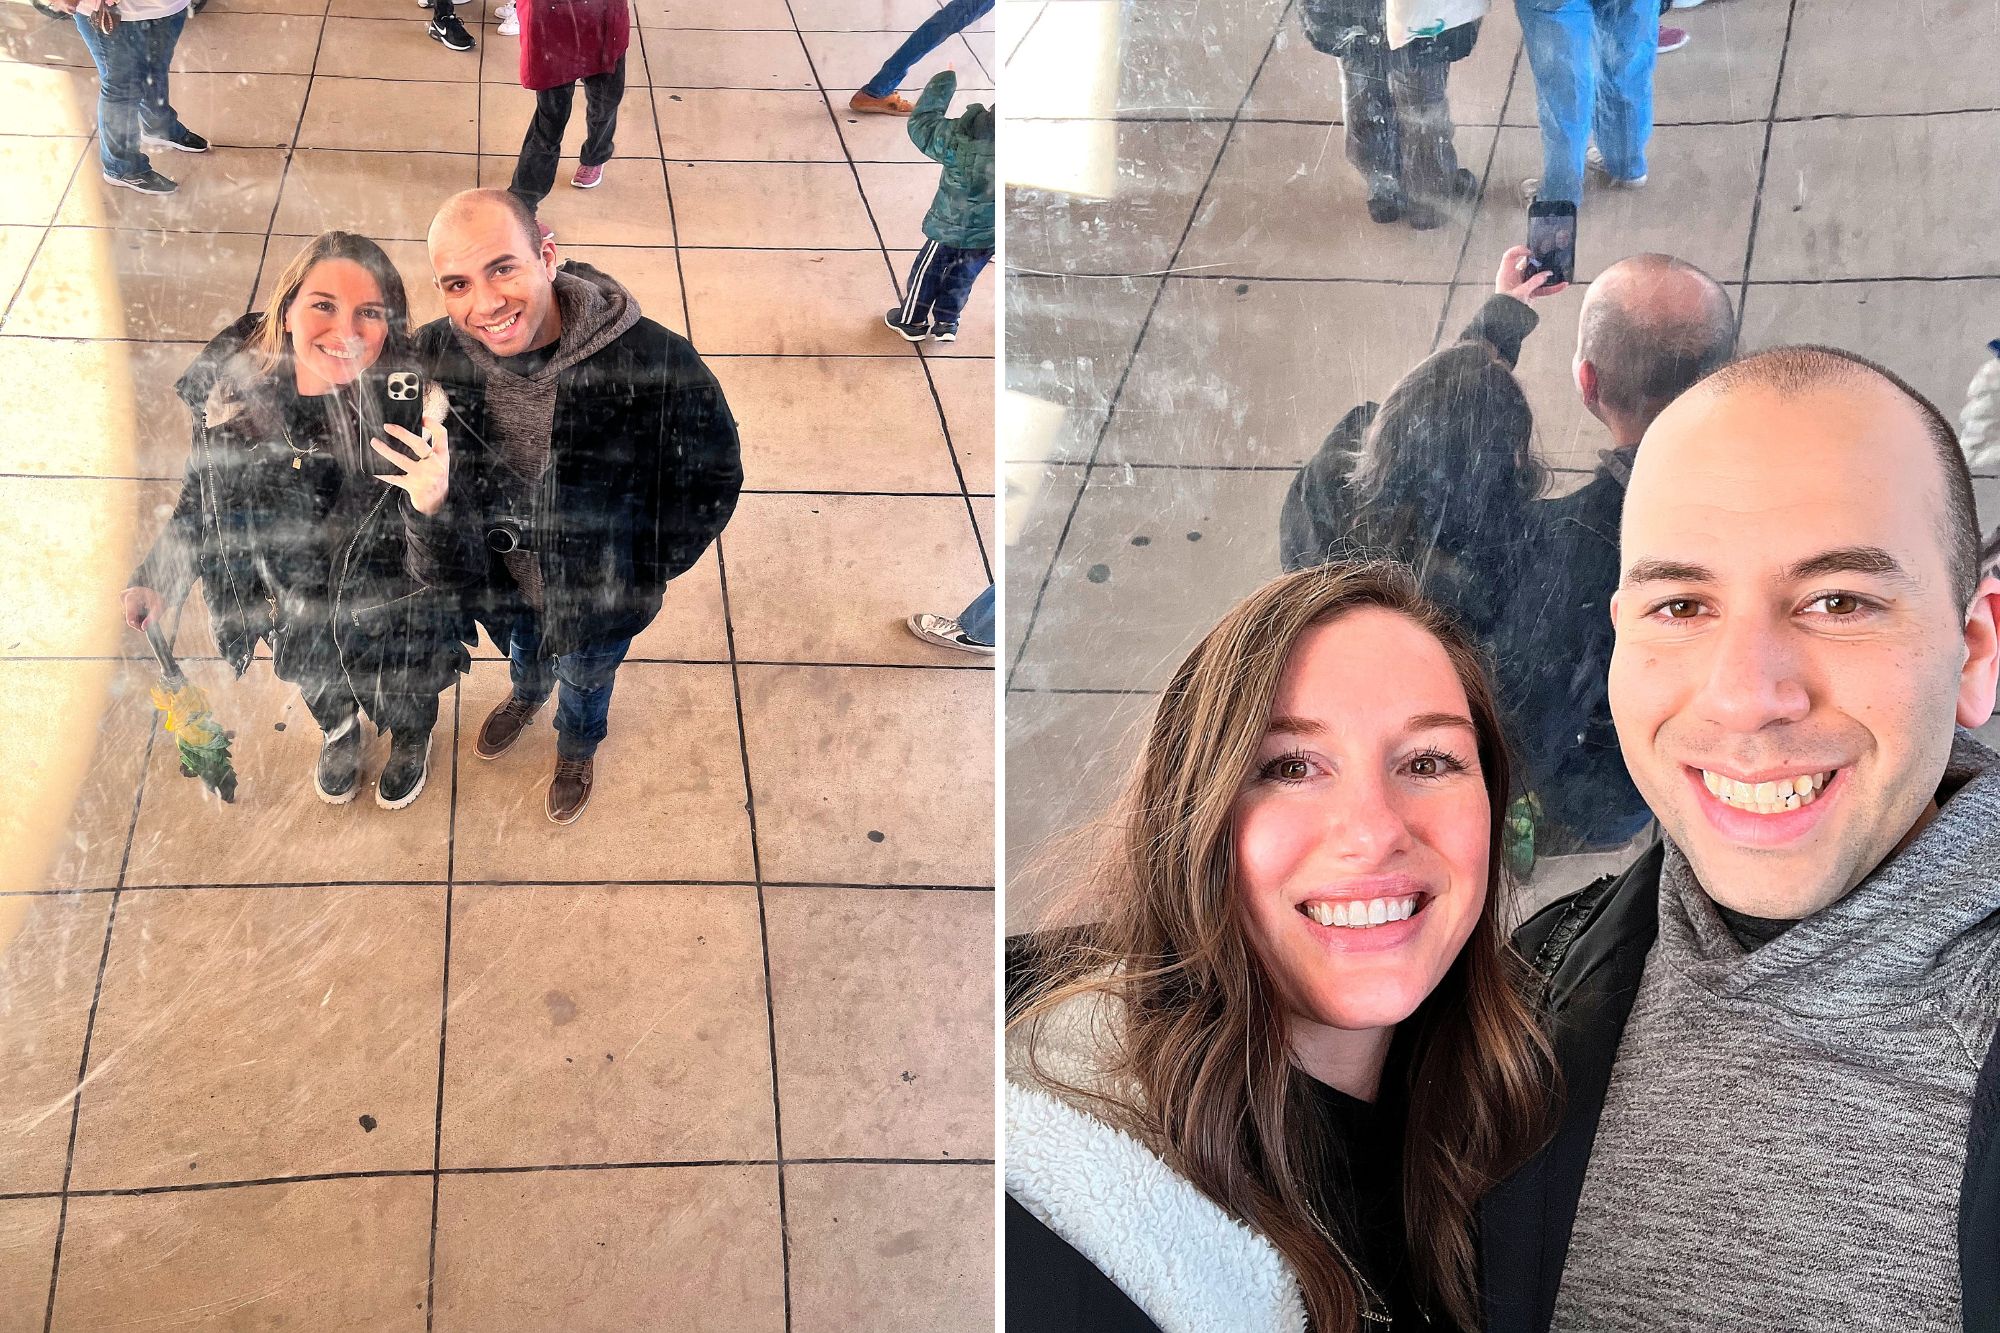 Alyssa and Michael take photos in the reflection of The Bean